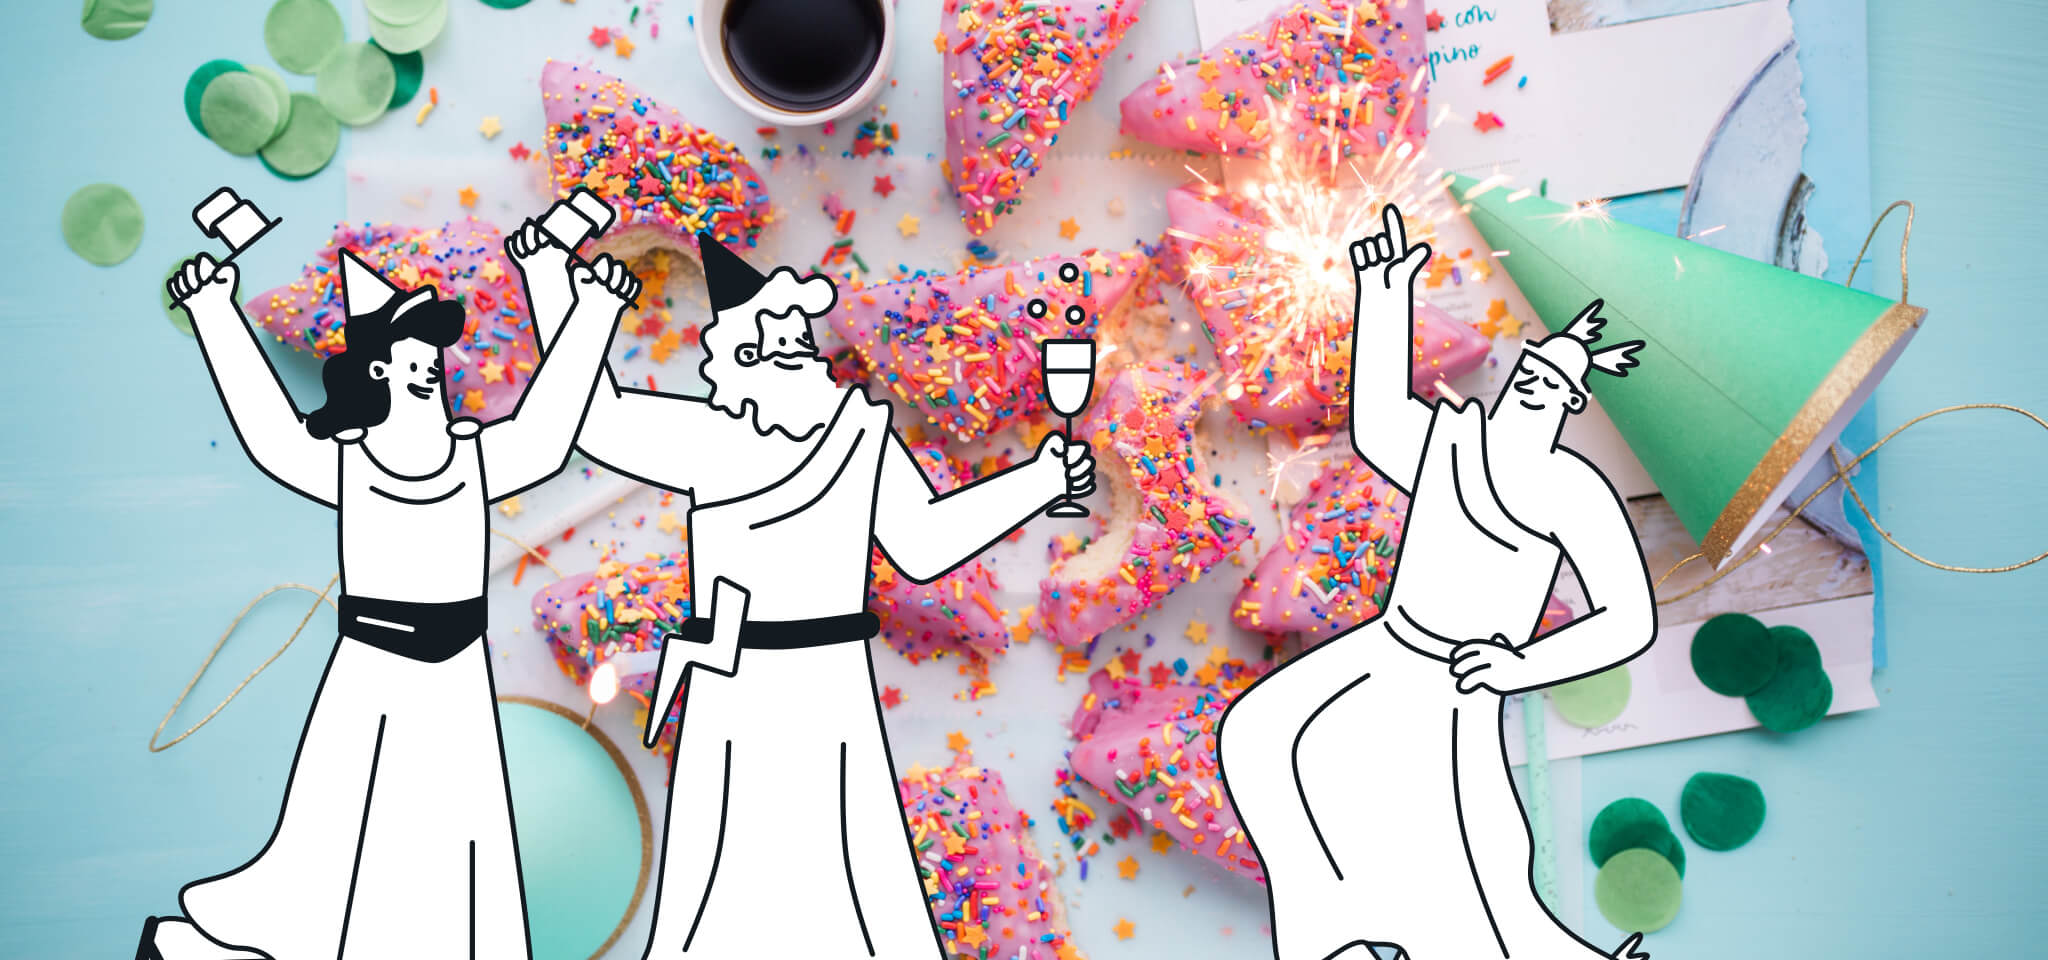 3 gods celebrating with pink doughnuts